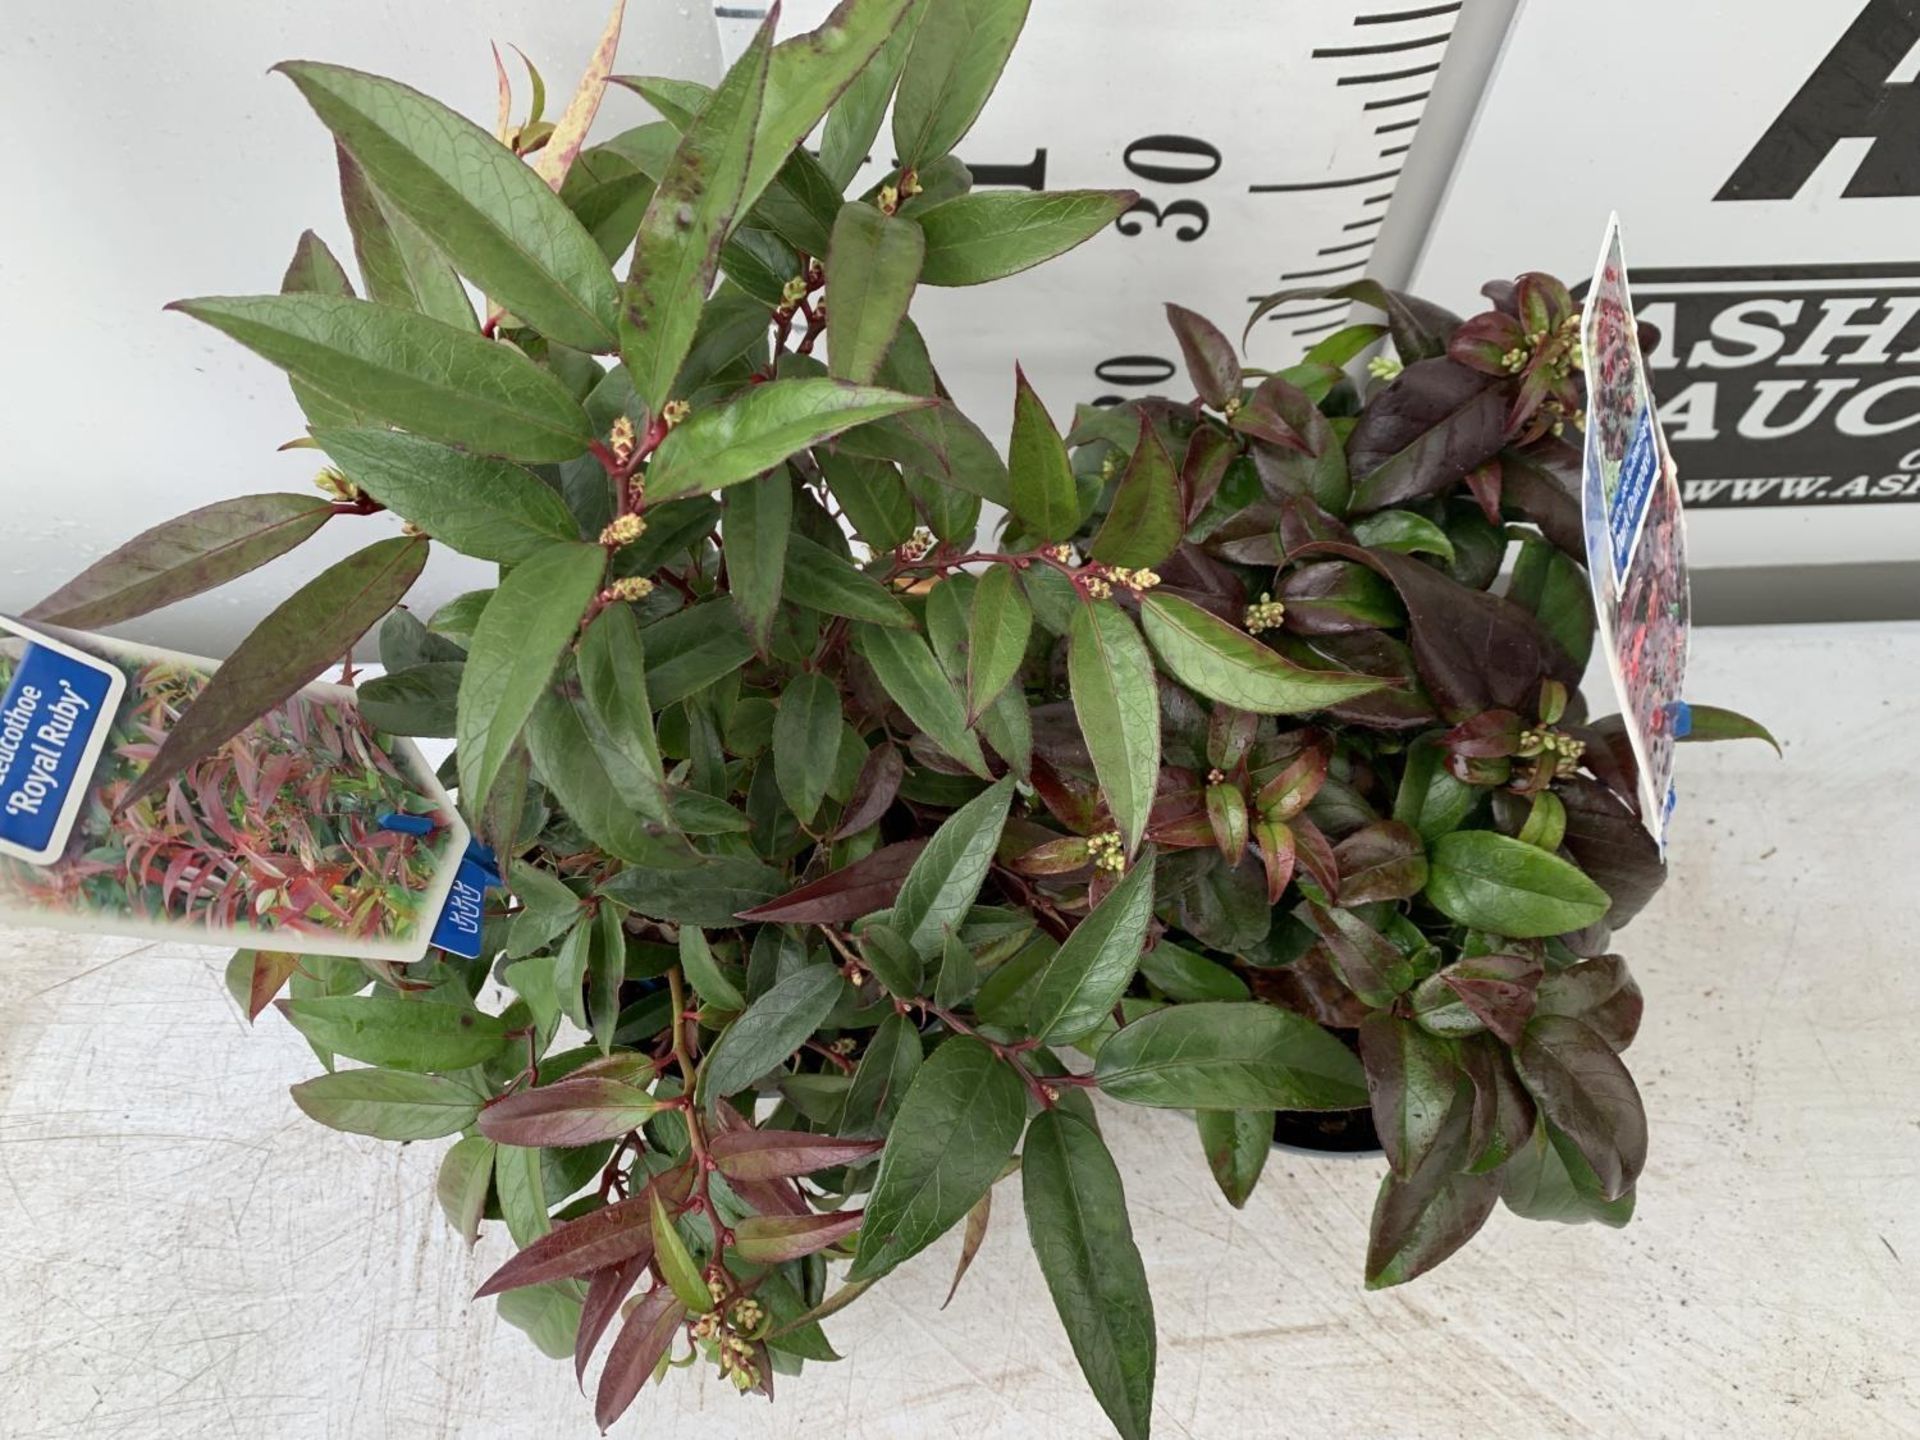 TWO LEUCOTHOE DARK DIAMOND AND ROYAL RUBY IN 2 LTR POTS 35CM TALL PLUS VAT TO BE SOLD FOR THE TWO - Image 2 of 5